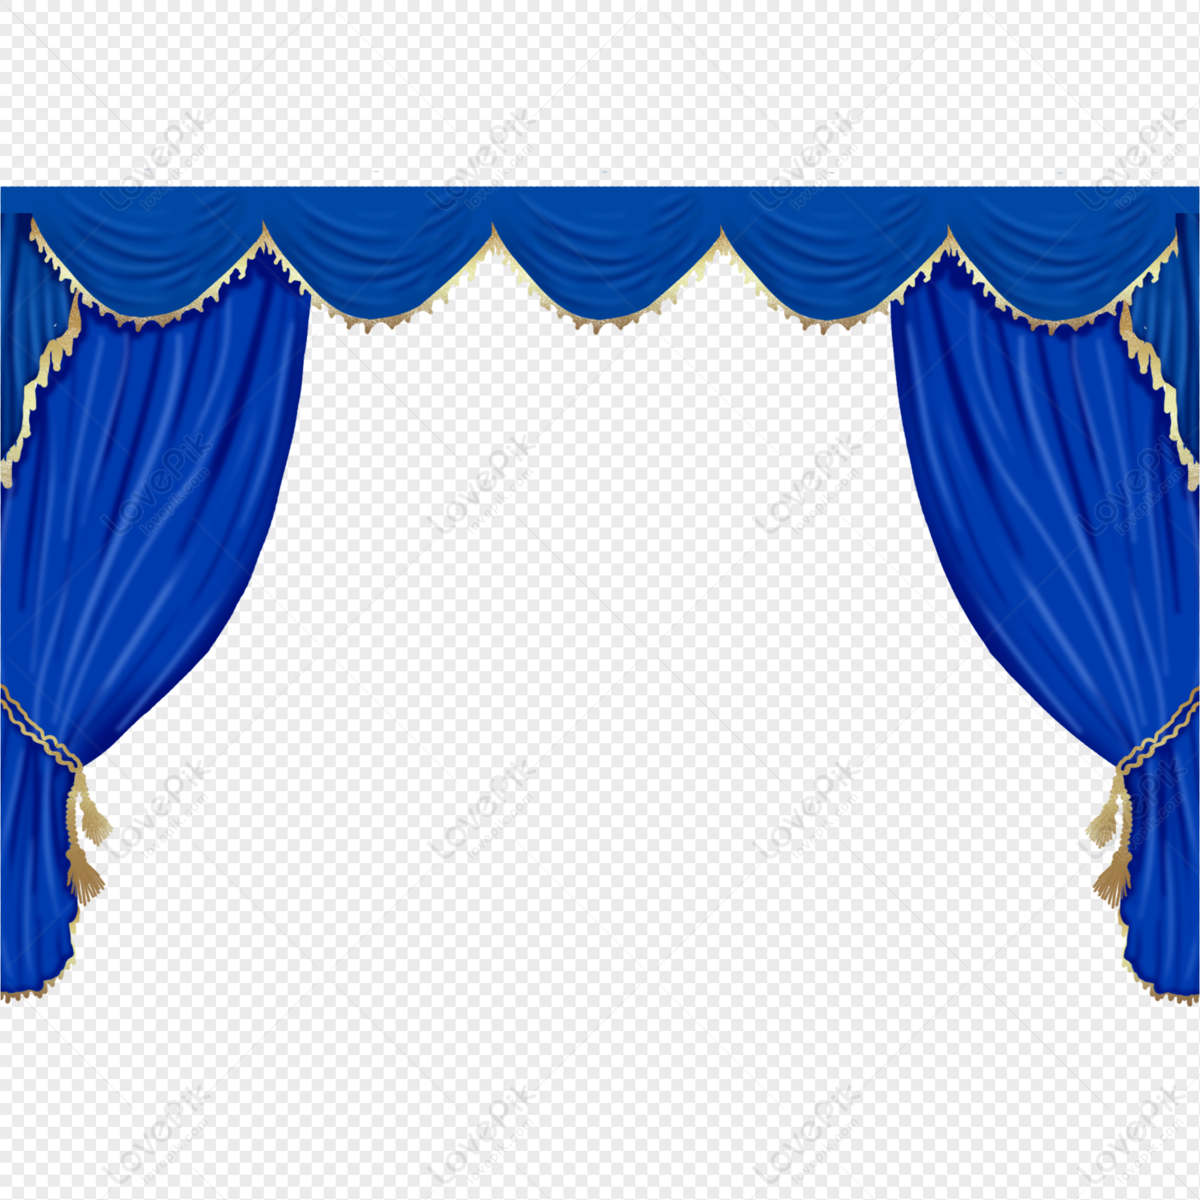 Blue Noble Stage Curtain PNG Transparent Image And Clipart Image For Free  Download - Lovepik | 401471357